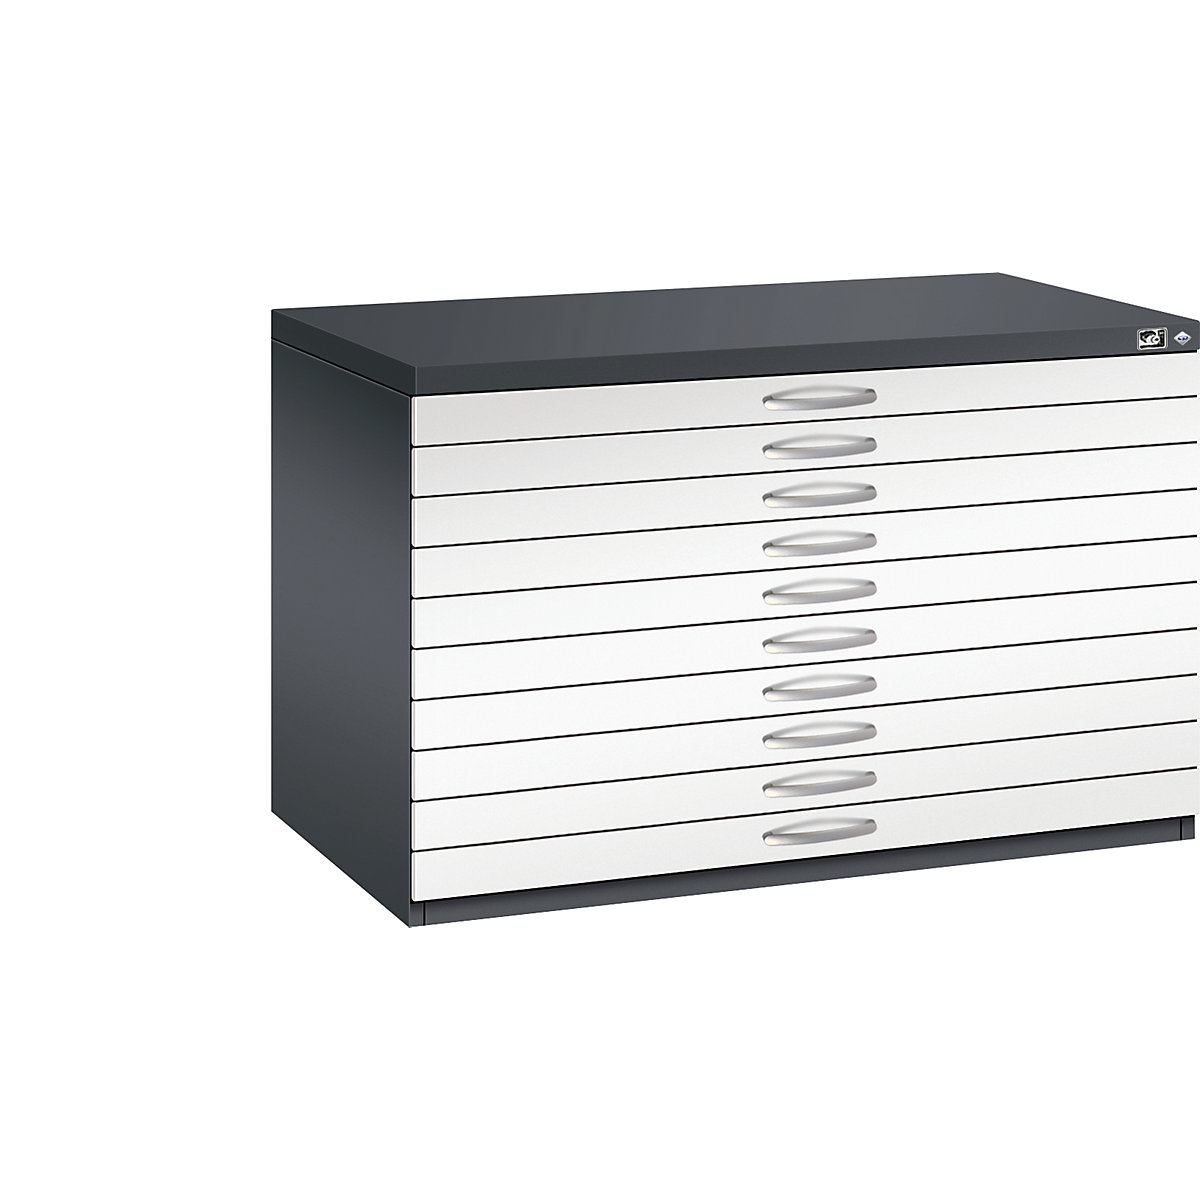 Drawing cabinet – C+P, A1, 10 drawers, height 760 mm, black grey / traffic white-12